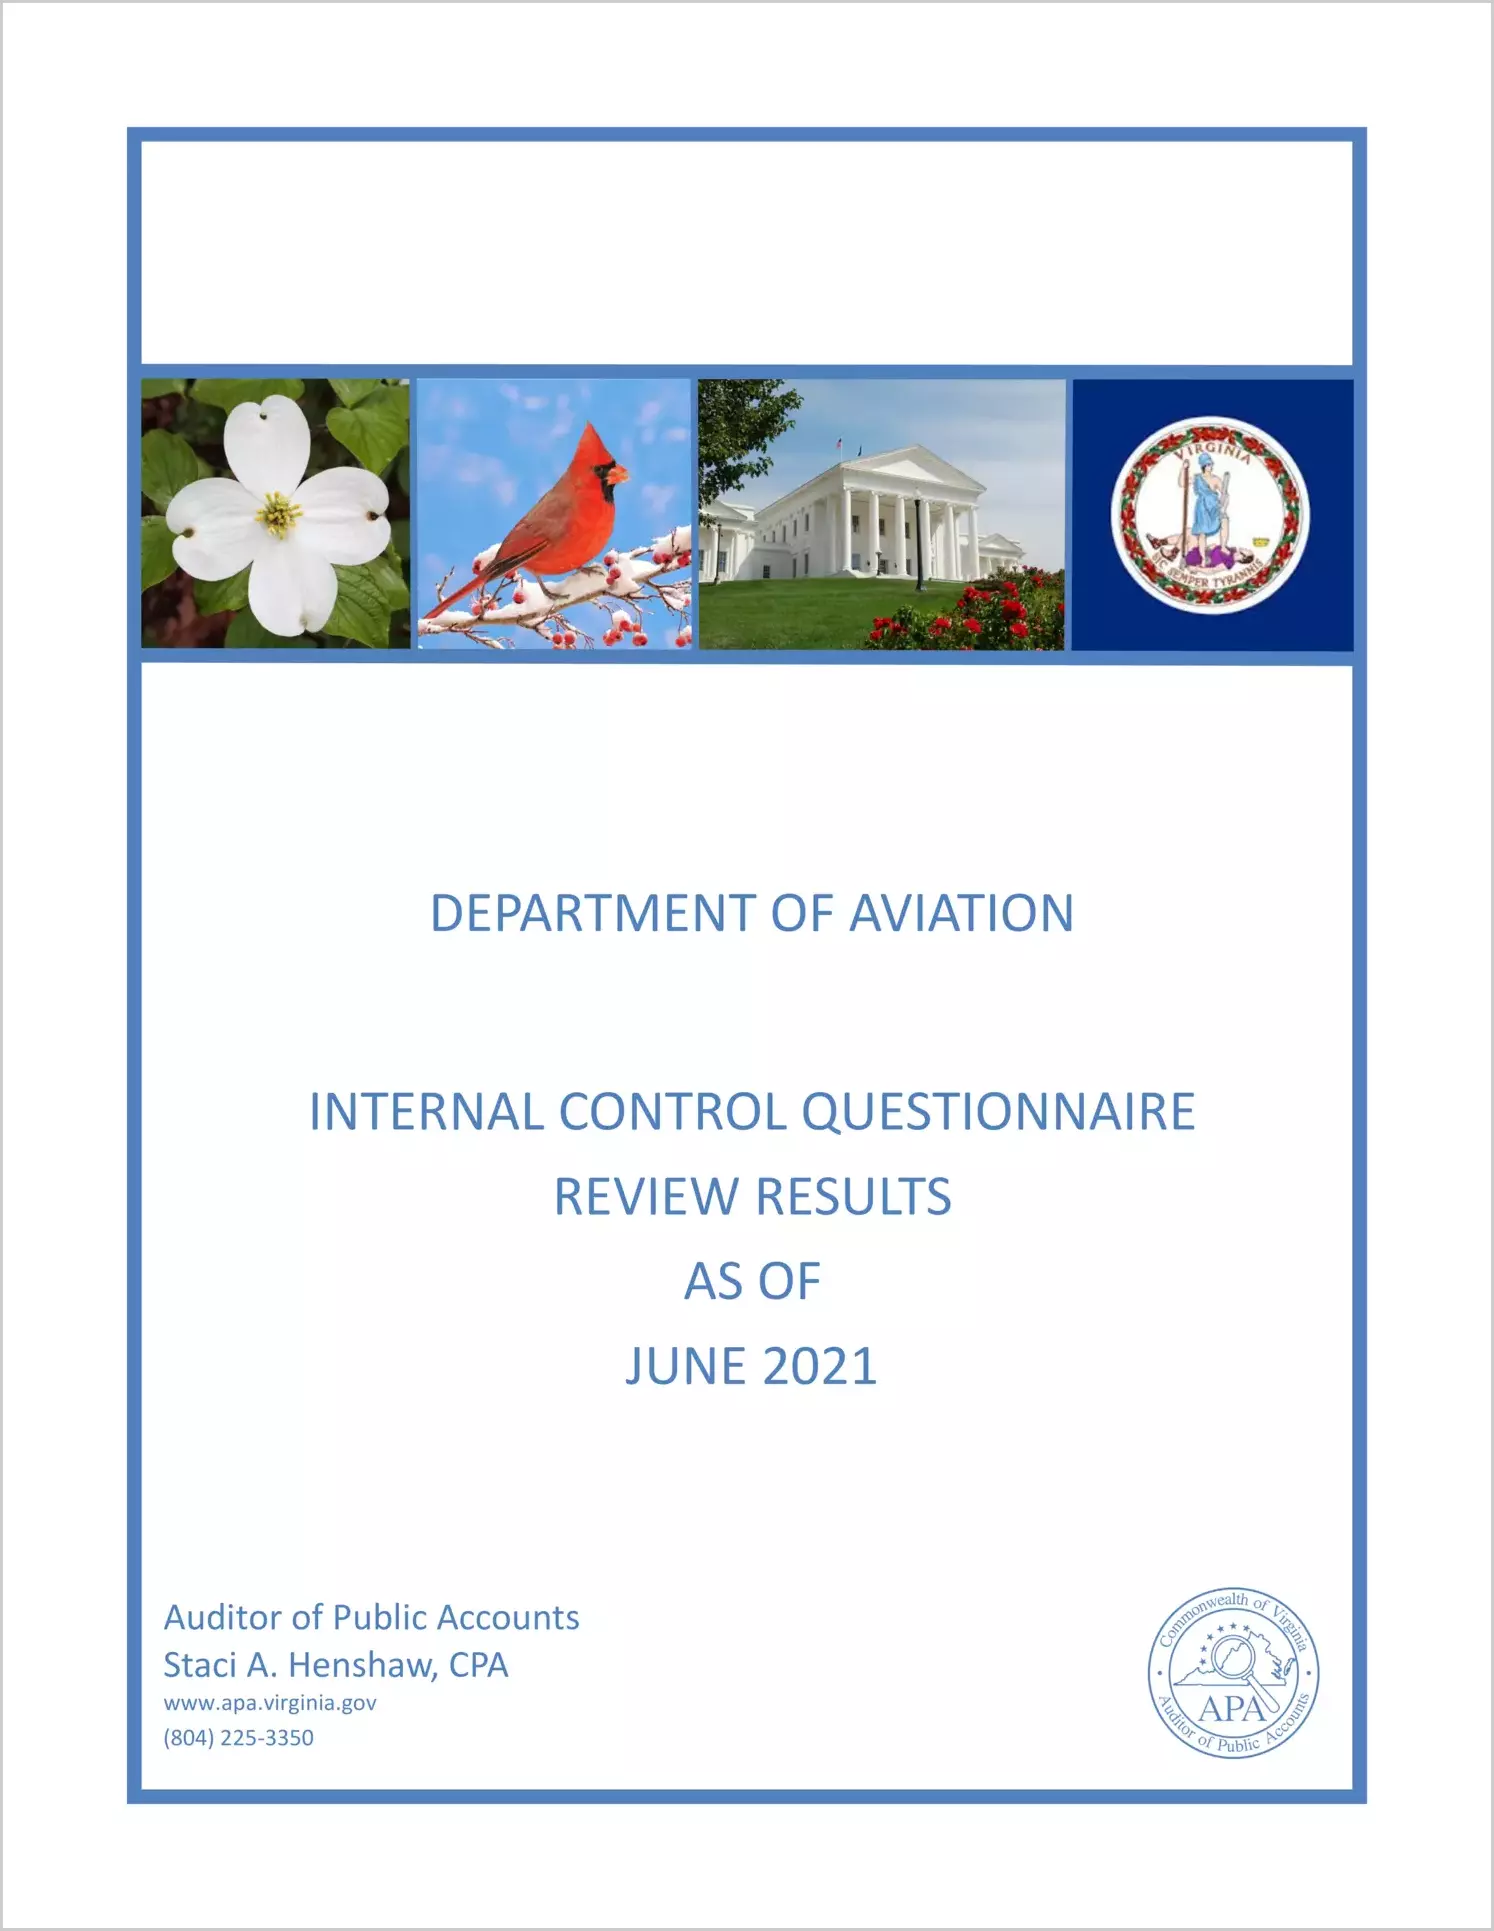 Department of Aviation Internal Control Questionnaire Review Results as of June 2021